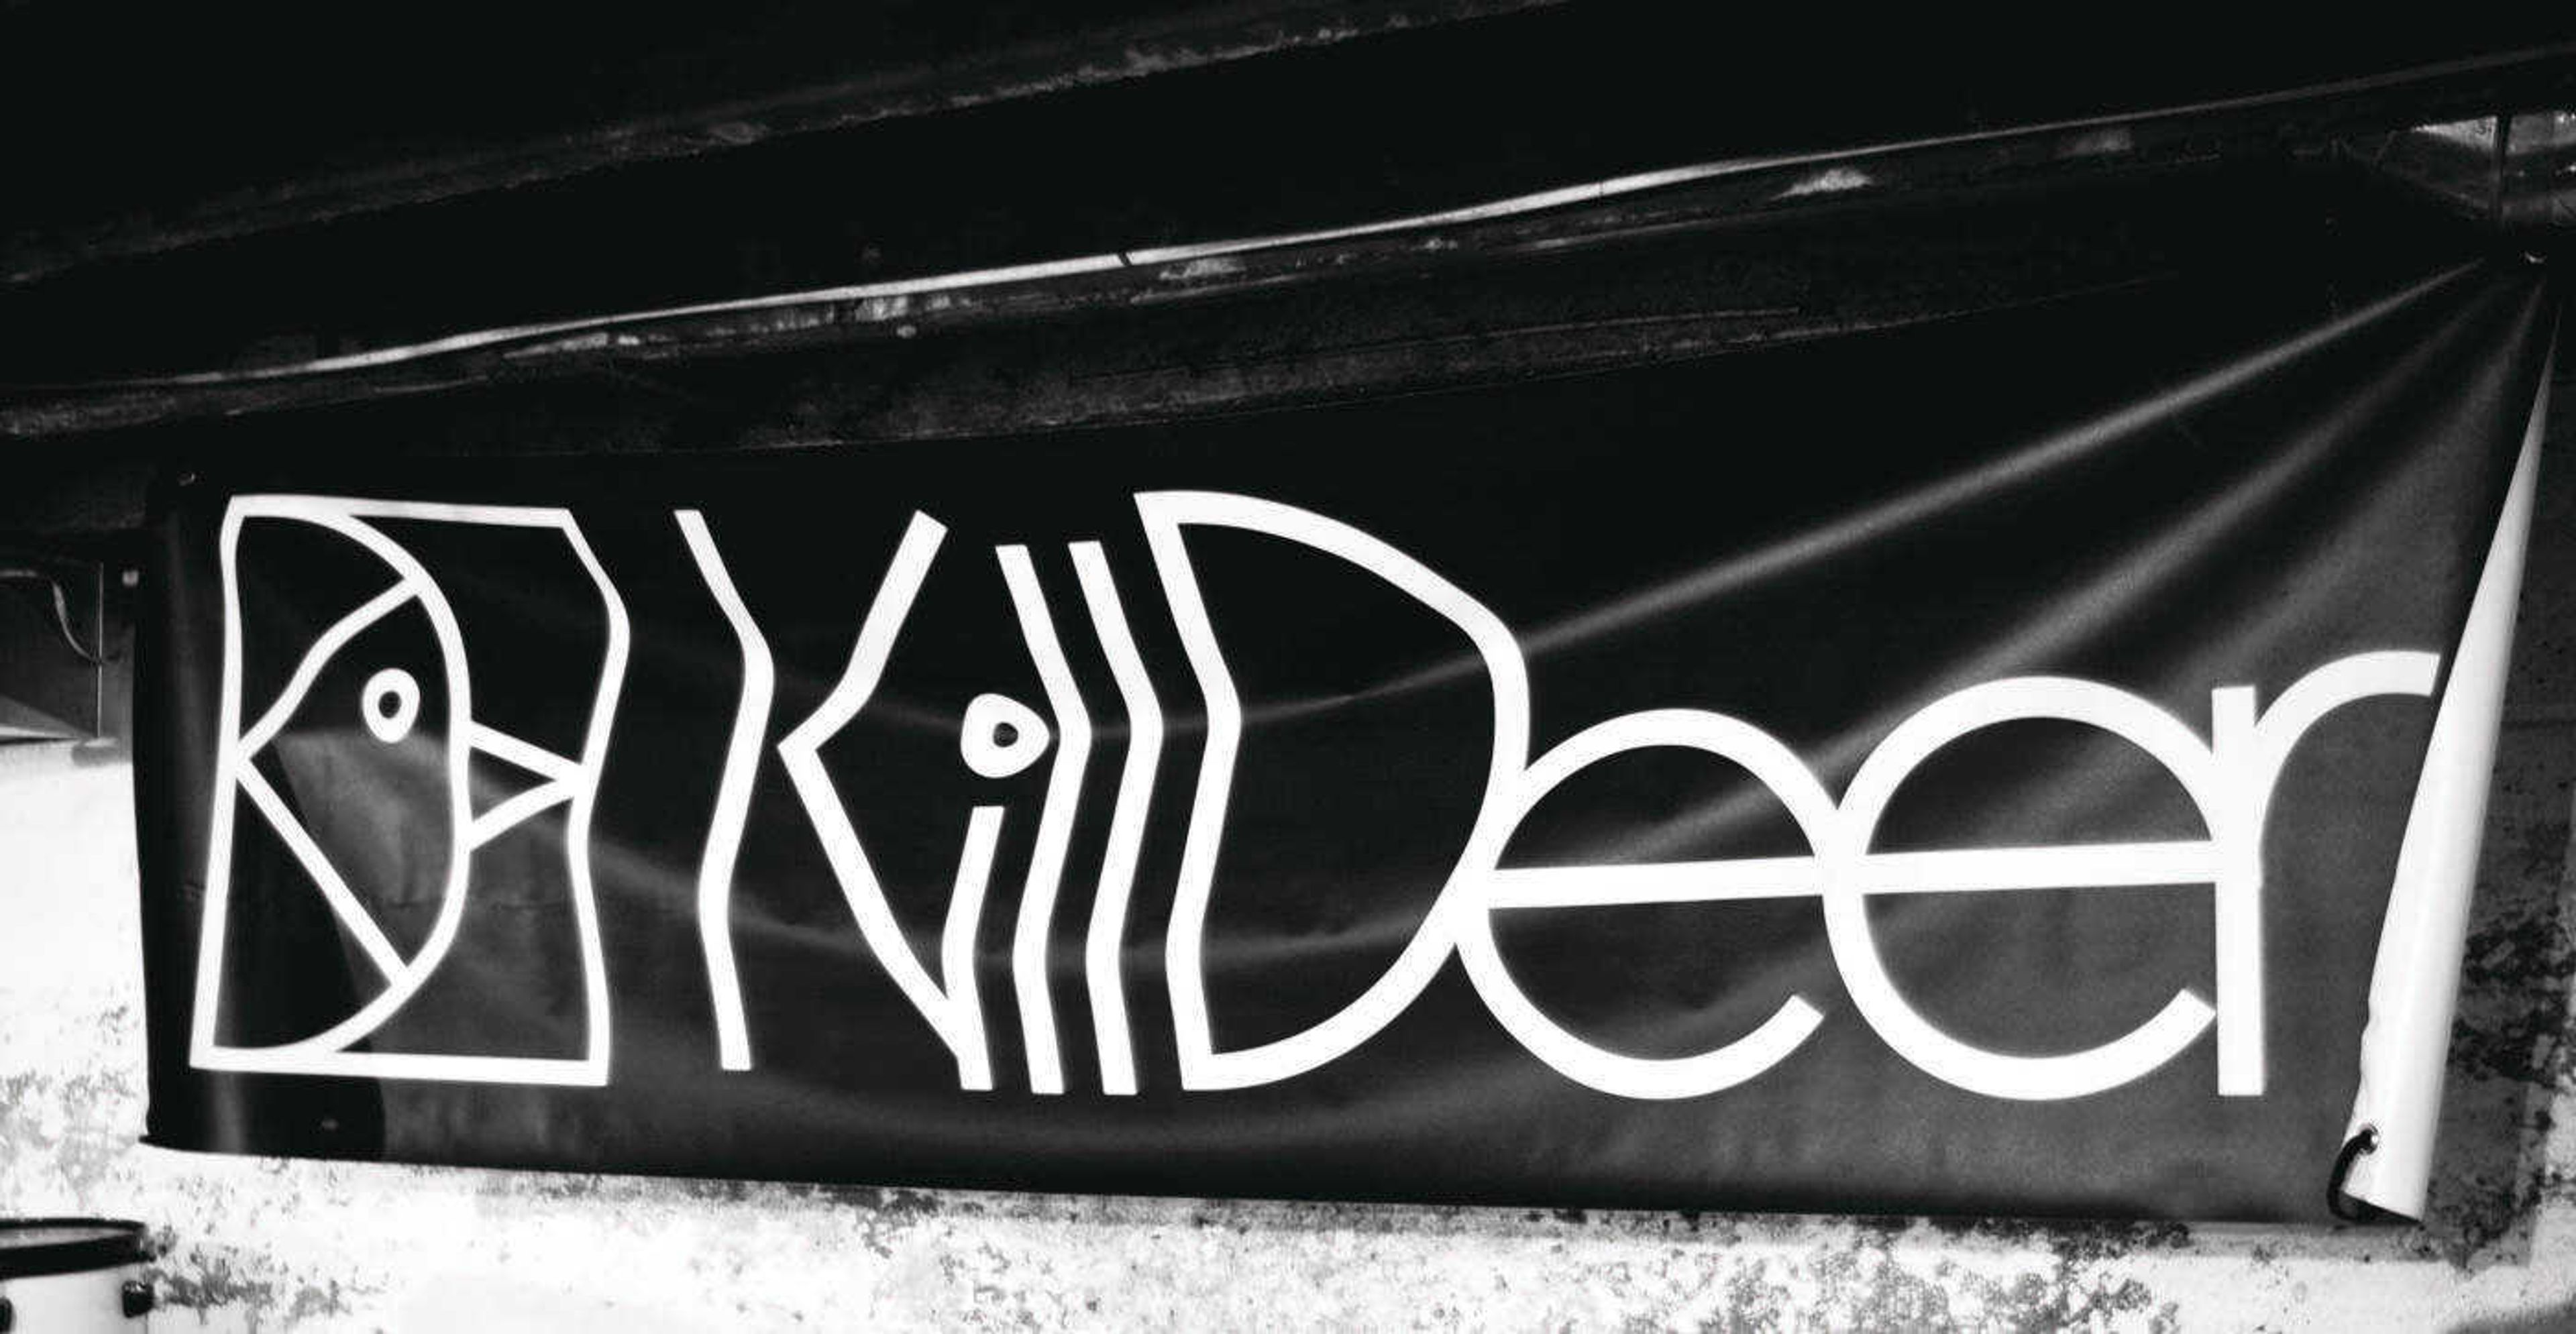 The Killdeer banner used at the Audiofeed Festival. Photo by J.C. Reeves